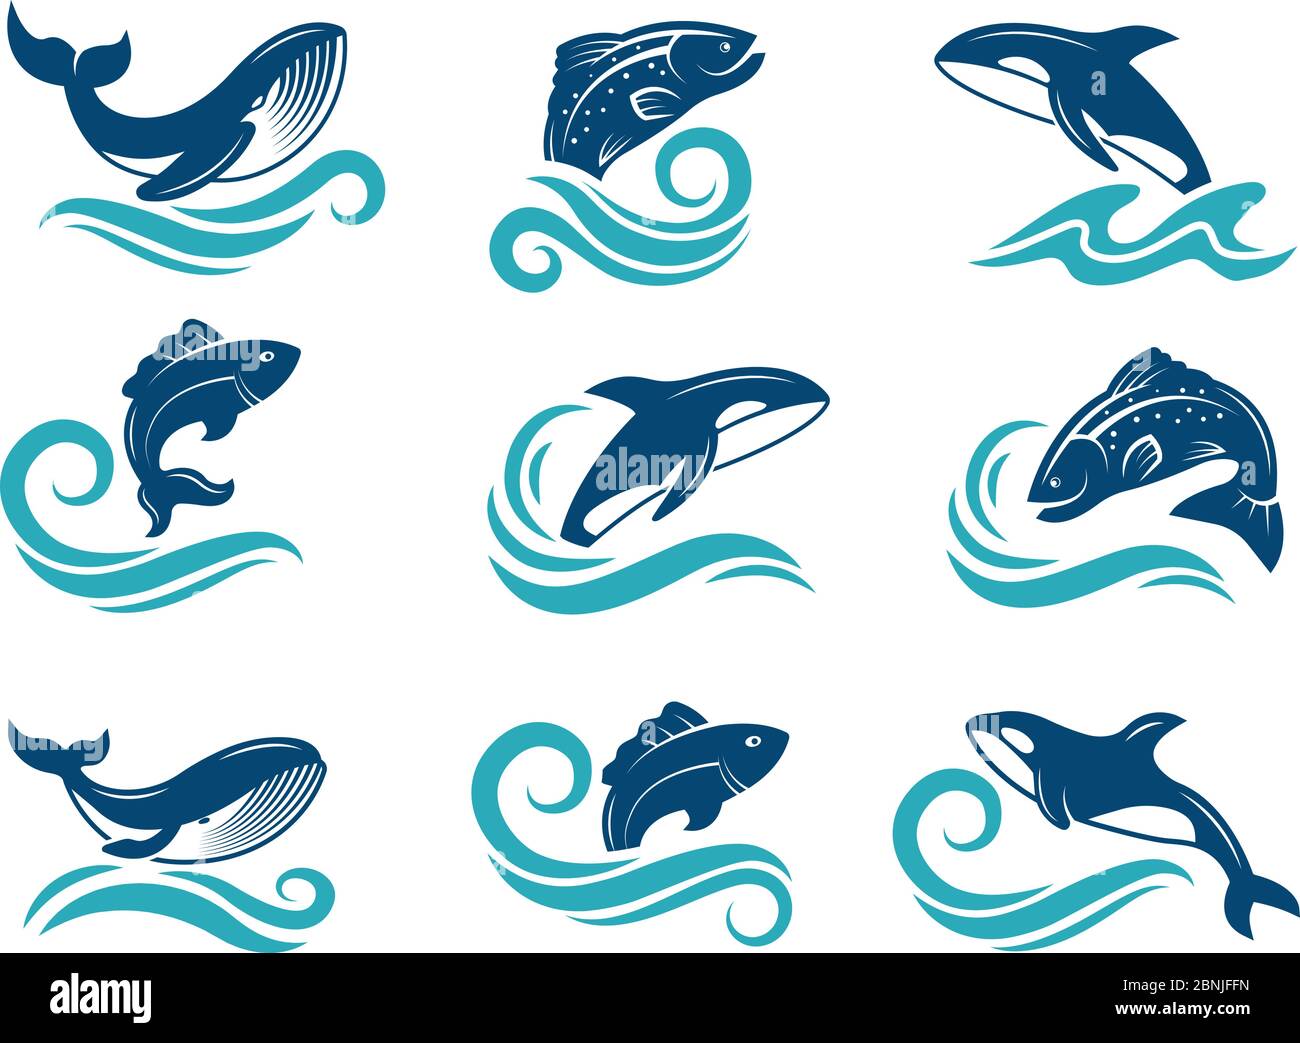 Stylized pictures of marine animals. Sharks, fishes and others. Symbols for logo design Stock Vector